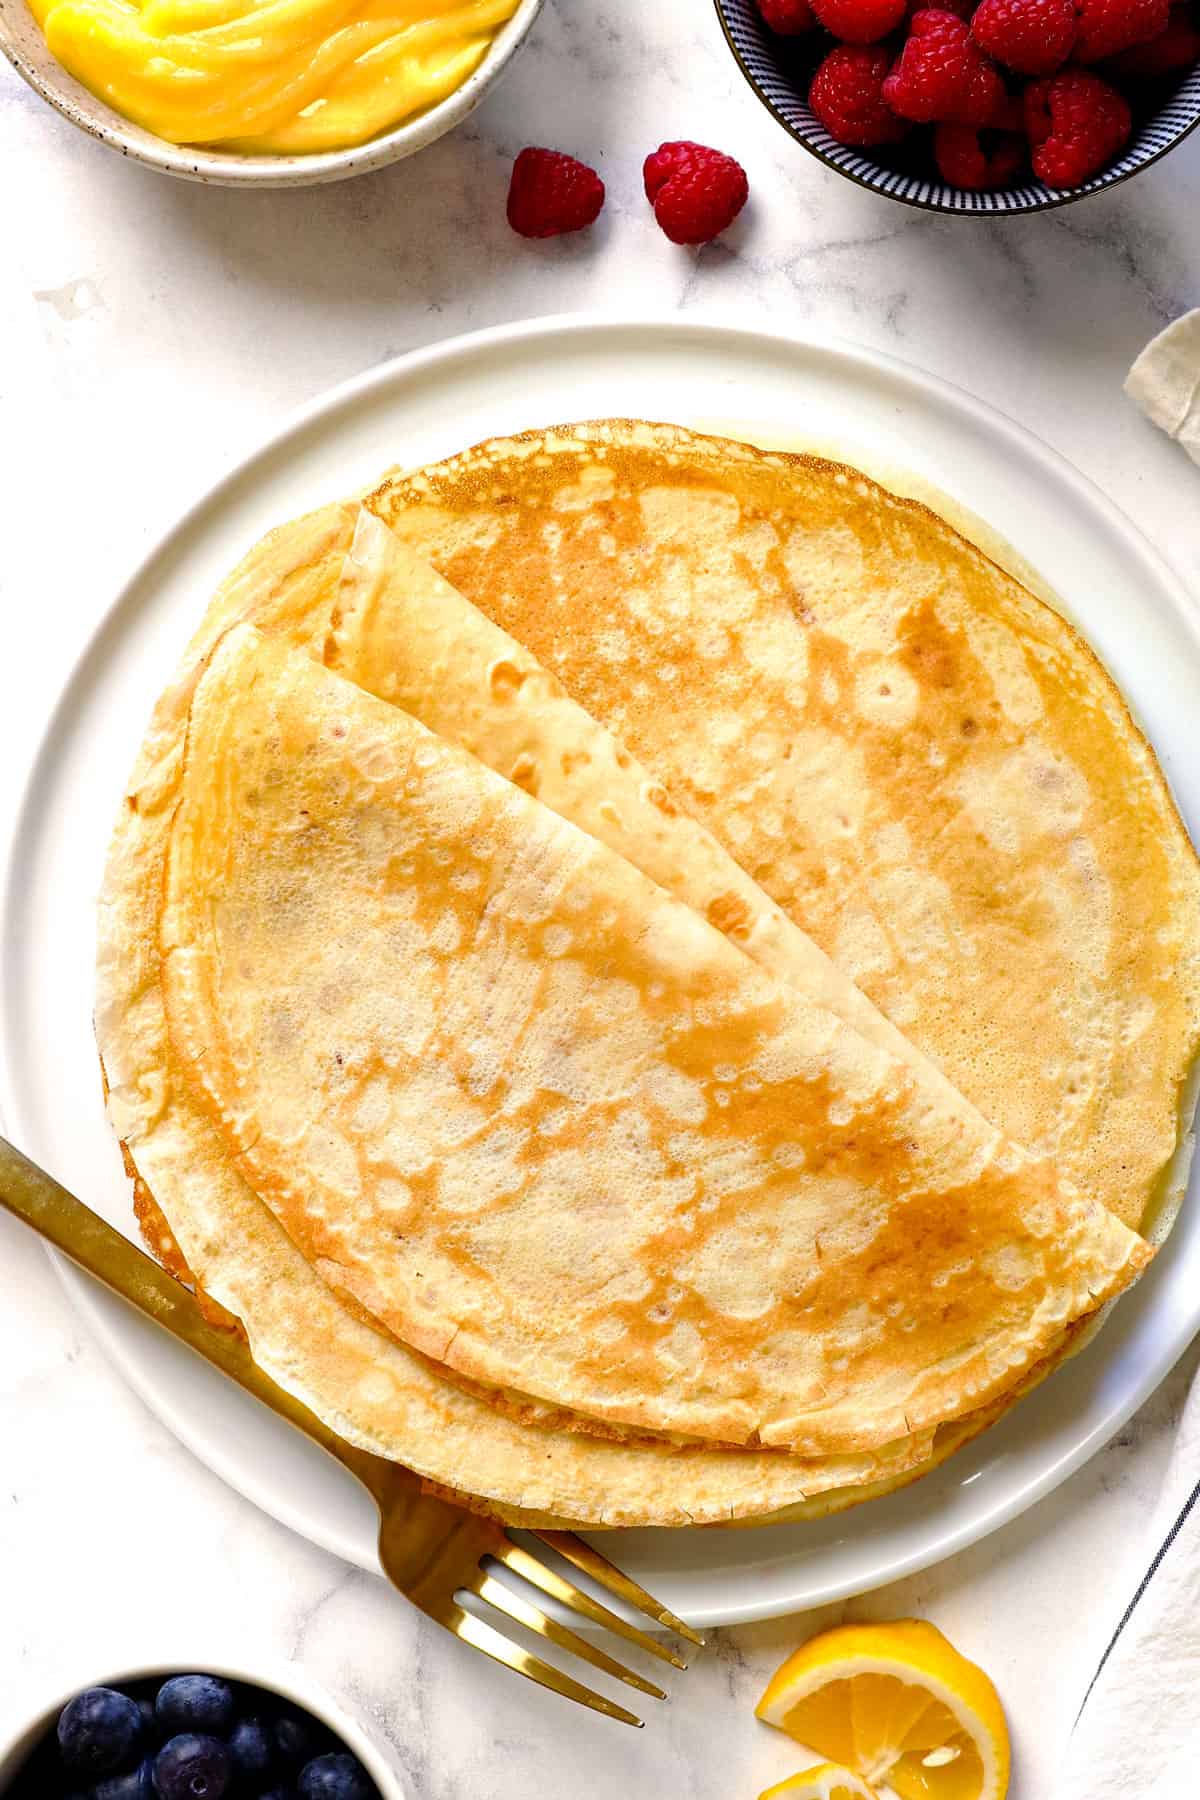 top view of French crepes on a plate showing how delicate and thin they are